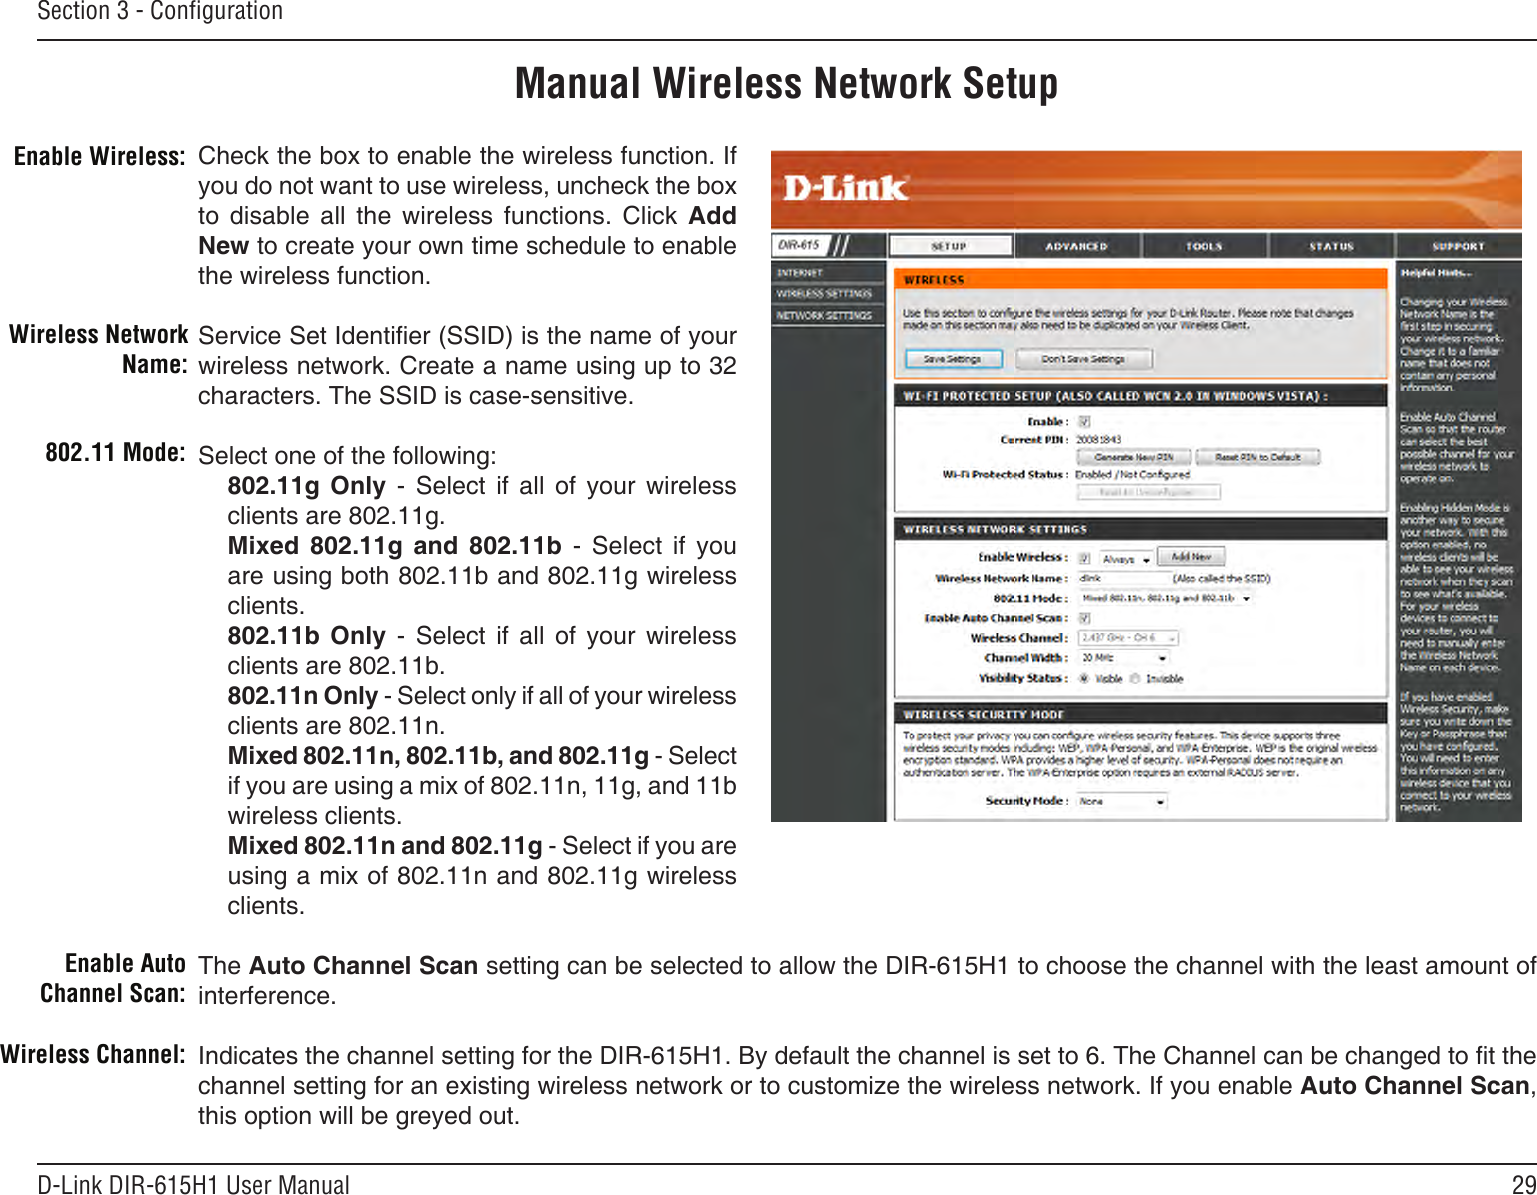 29D-Link DIR-615H1 User ManualSection 3 - CongurationManual Wireless Network SetupCheck the box to enable the wireless function. If you do not want to use wireless, uncheck the box to  disable  all  the  wireless  functions.  Click  Add New to create your own time schedule to enable the wireless function. Service Set Identier (SSID) is the name of your wireless network. Create a name using up to 32 characters. The SSID is case-sensitive.Select one of the following:802.11g  Only  -  Select  if  all  of  your  wireless clients are 802.11g.Mixed  802.11g  and  802.11b  -  Select  if  you are using both 802.11b and 802.11g wireless clients.802.11b  Only  -  Select  if  all  of  your  wireless clients are 802.11b.802.11n Only - Select only if all of your wireless clients are 802.11n.Mixed 802.11n, 802.11b, and 802.11g - Select if you are using a mix of 802.11n, 11g, and 11b wireless clients.Mixed 802.11n and 802.11g - Select if you are using a mix of 802.11n and 802.11g wireless clients.The Auto Channel Scan setting can be selected to allow the DIR-615H1 to choose the channel with the least amount of interference.Indicates the channel setting for the DIR-615H1. By default the channel is set to 6. The Channel can be changed to t the channel setting for an existing wireless network or to customize the wireless network. If you enable Auto Channel Scan, this option will be greyed out.Enable Wireless:Wireless Network Name:802.11 Mode:Enable Auto Channel Scan:Wireless Channel: